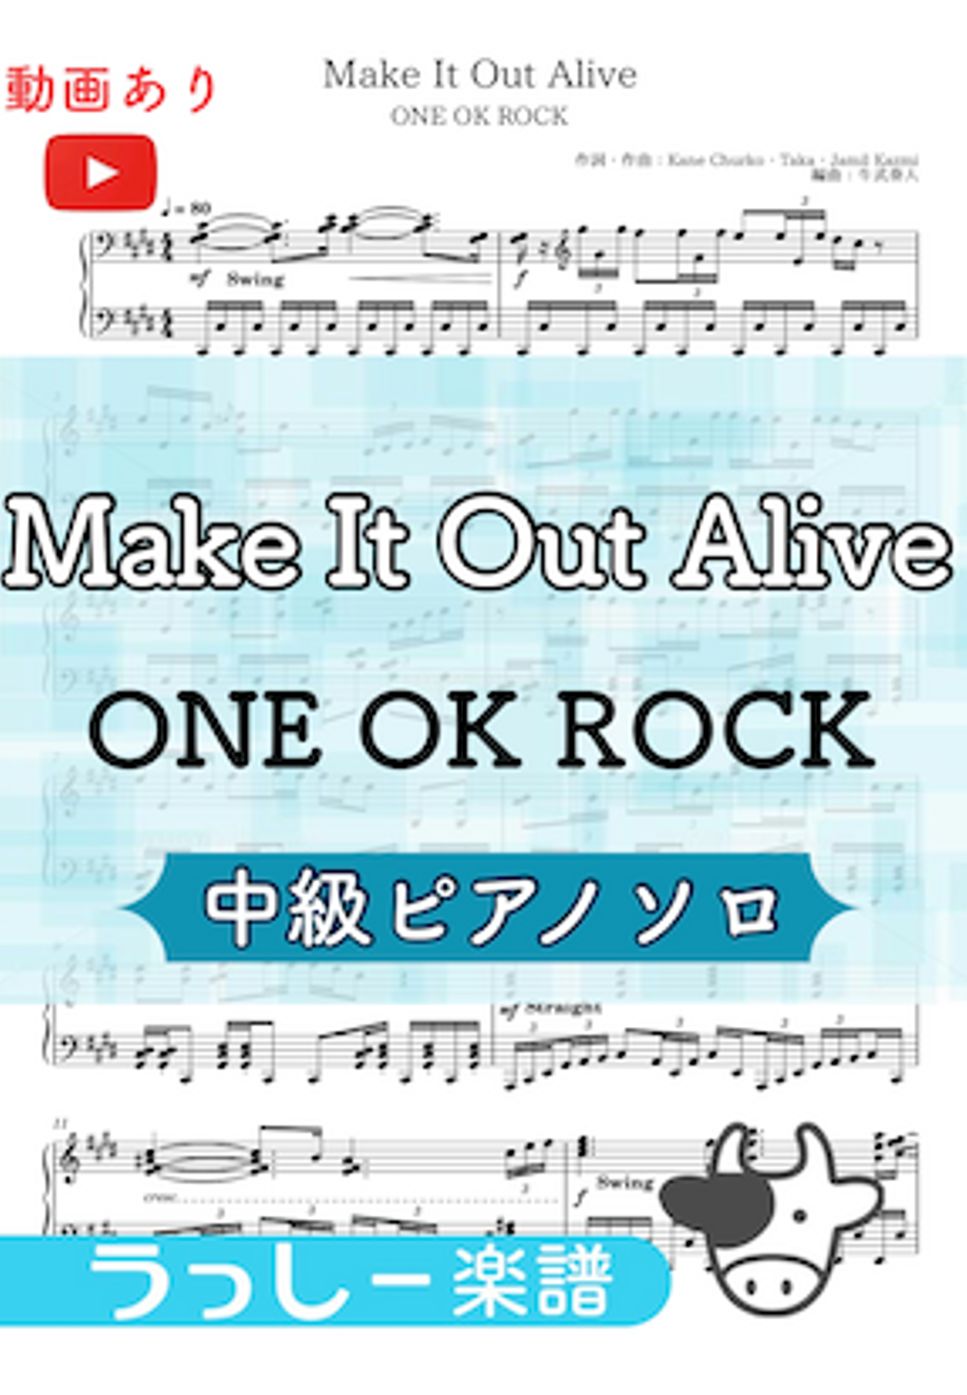 ONE OK ROCK - Make it out alive (中級ピアノソロ) by 牛武奏人